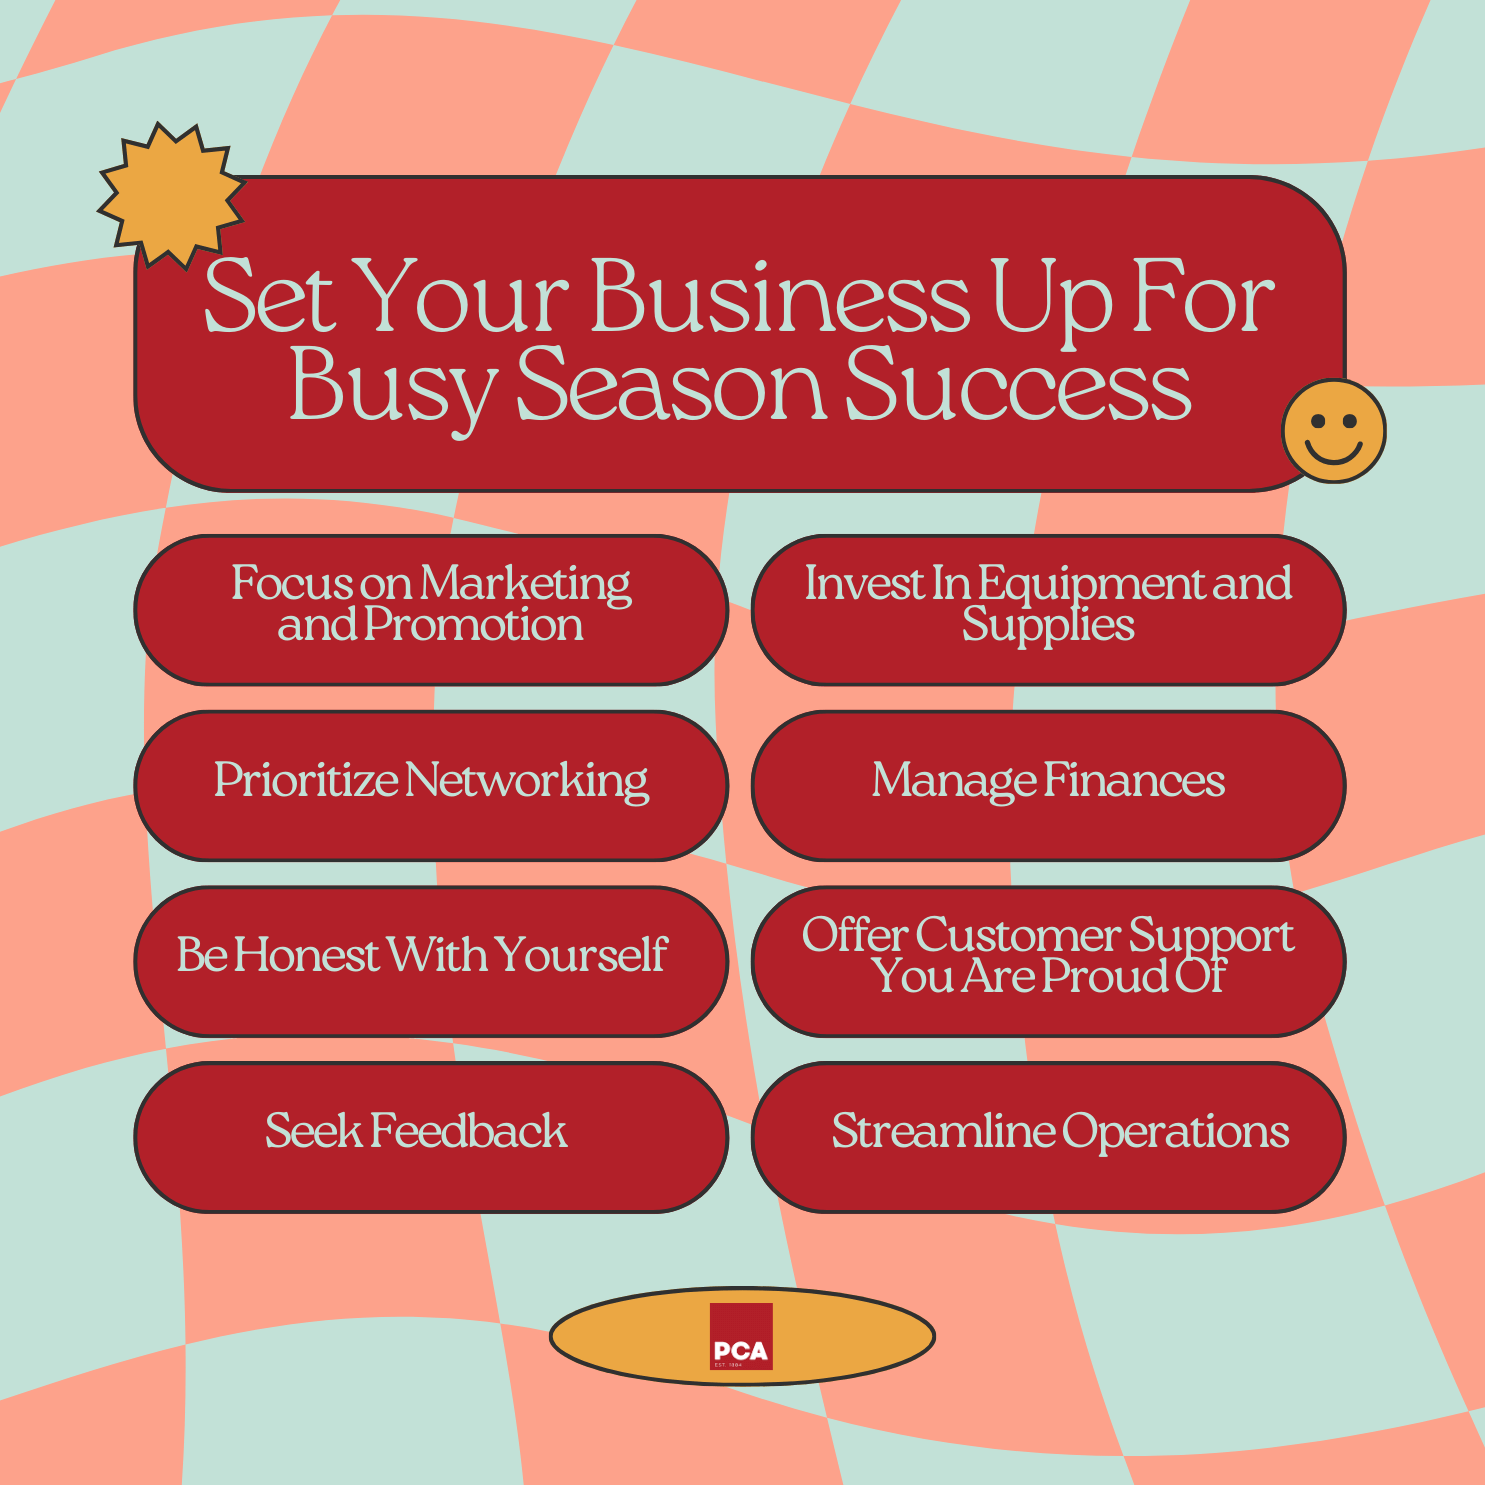 Set Your Business Up For Busy Season Success